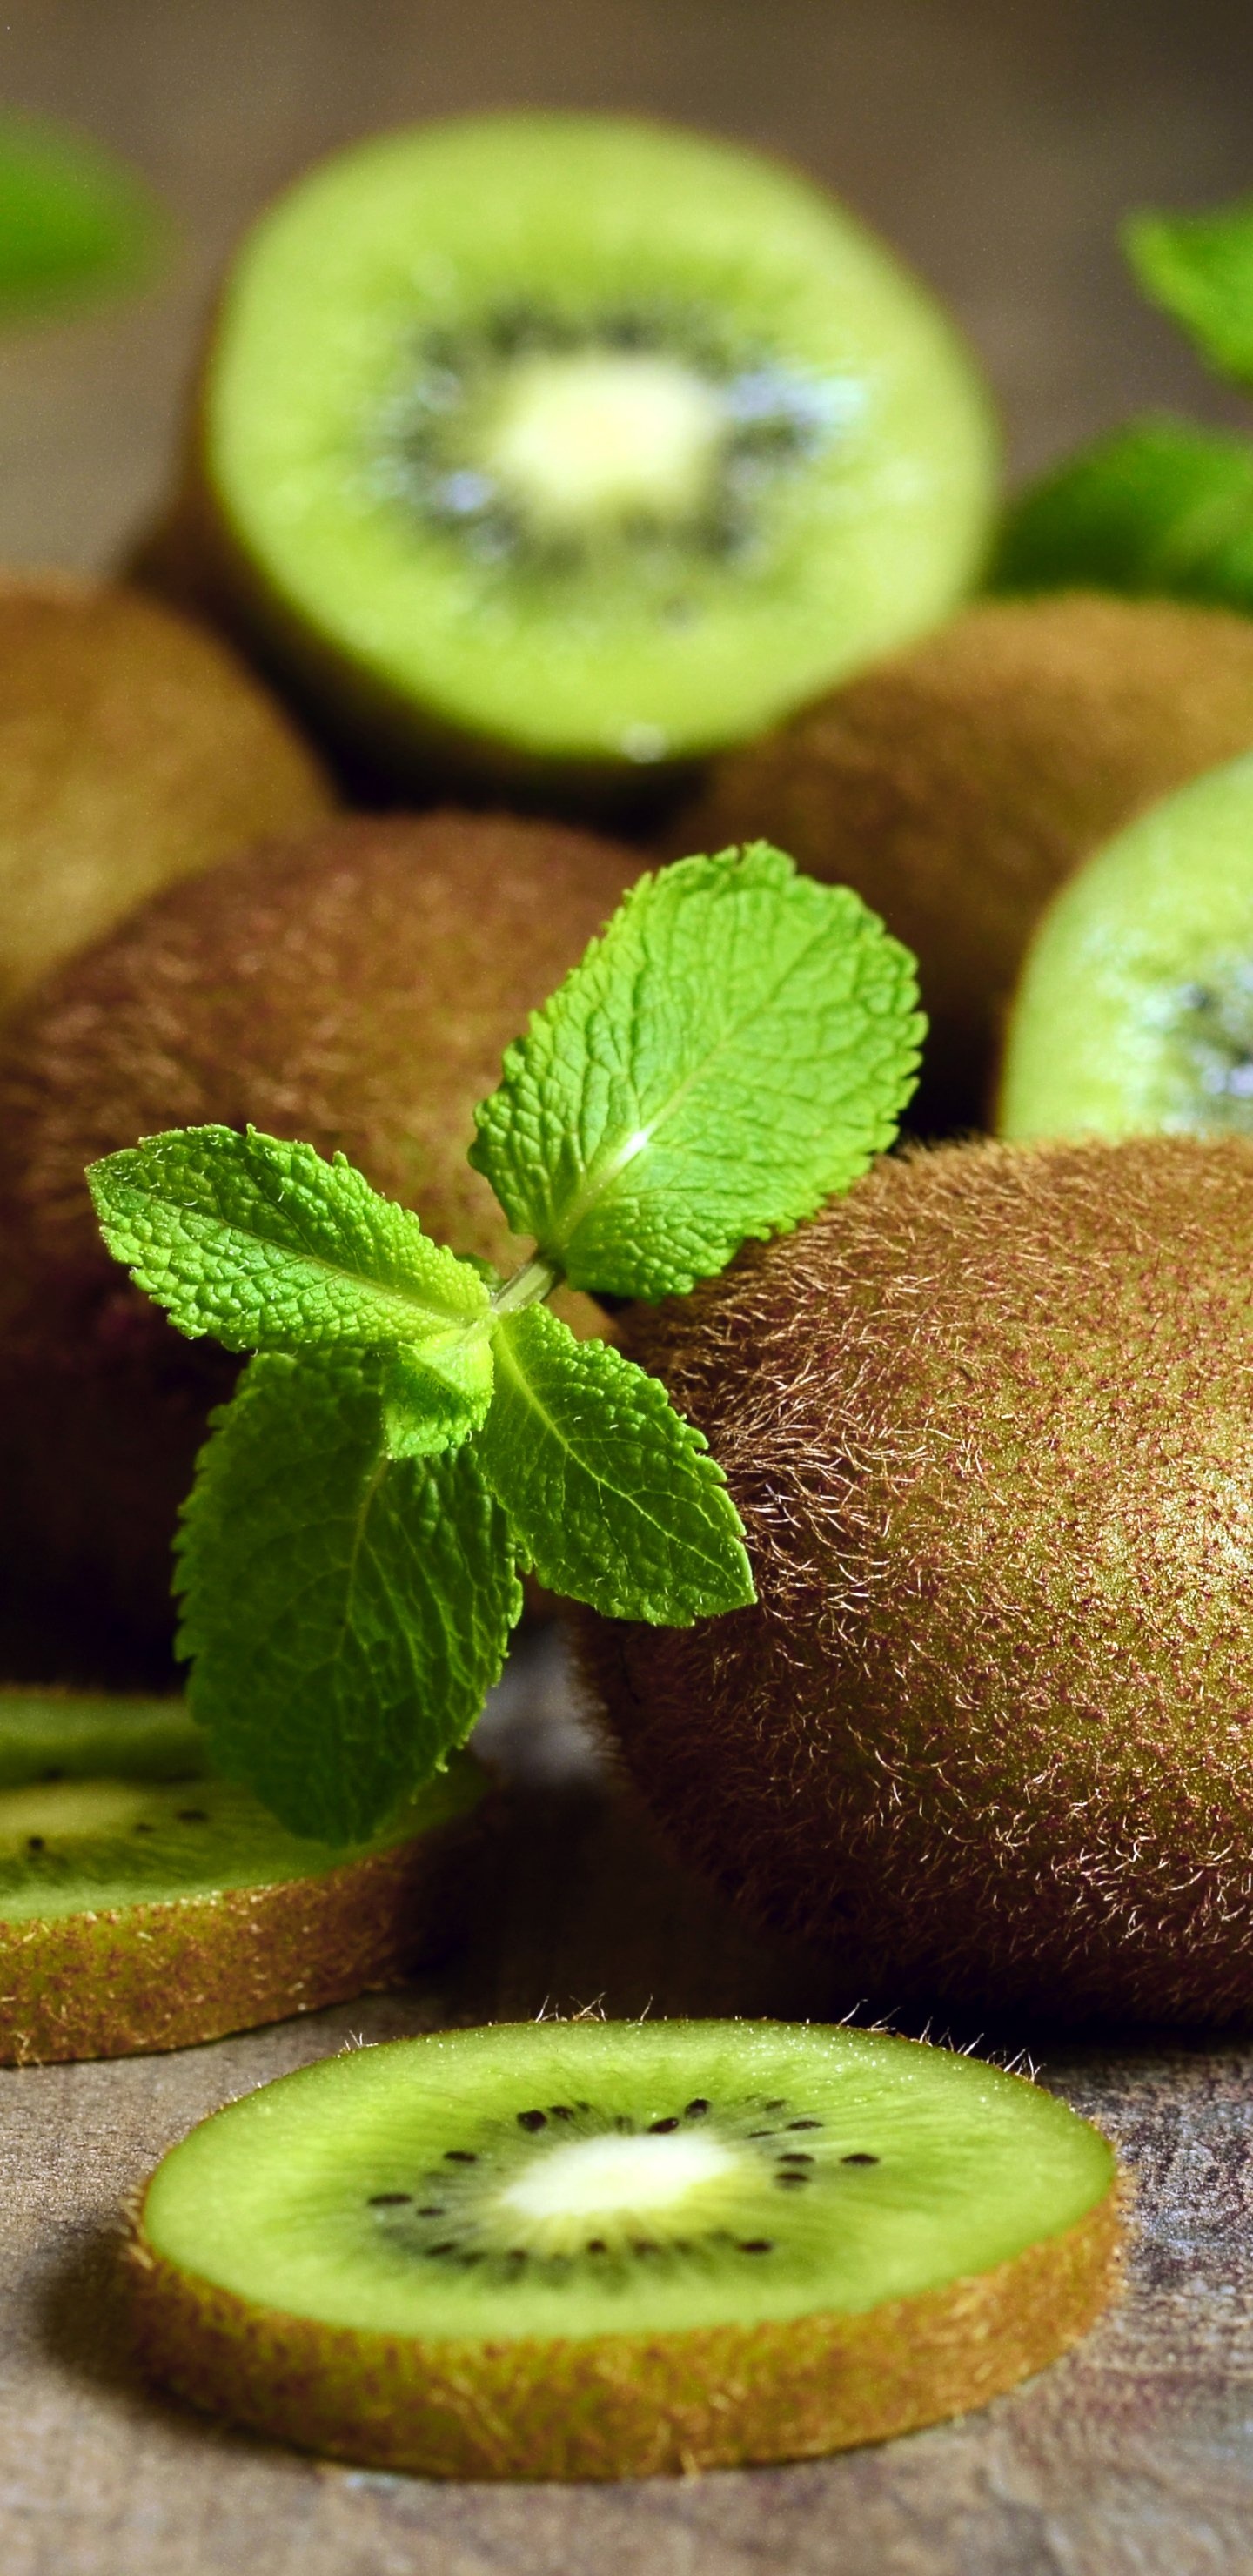 Food kiwi, Nutritious snack, Natural source, Tropical flavor, 1440x2960 HD Handy